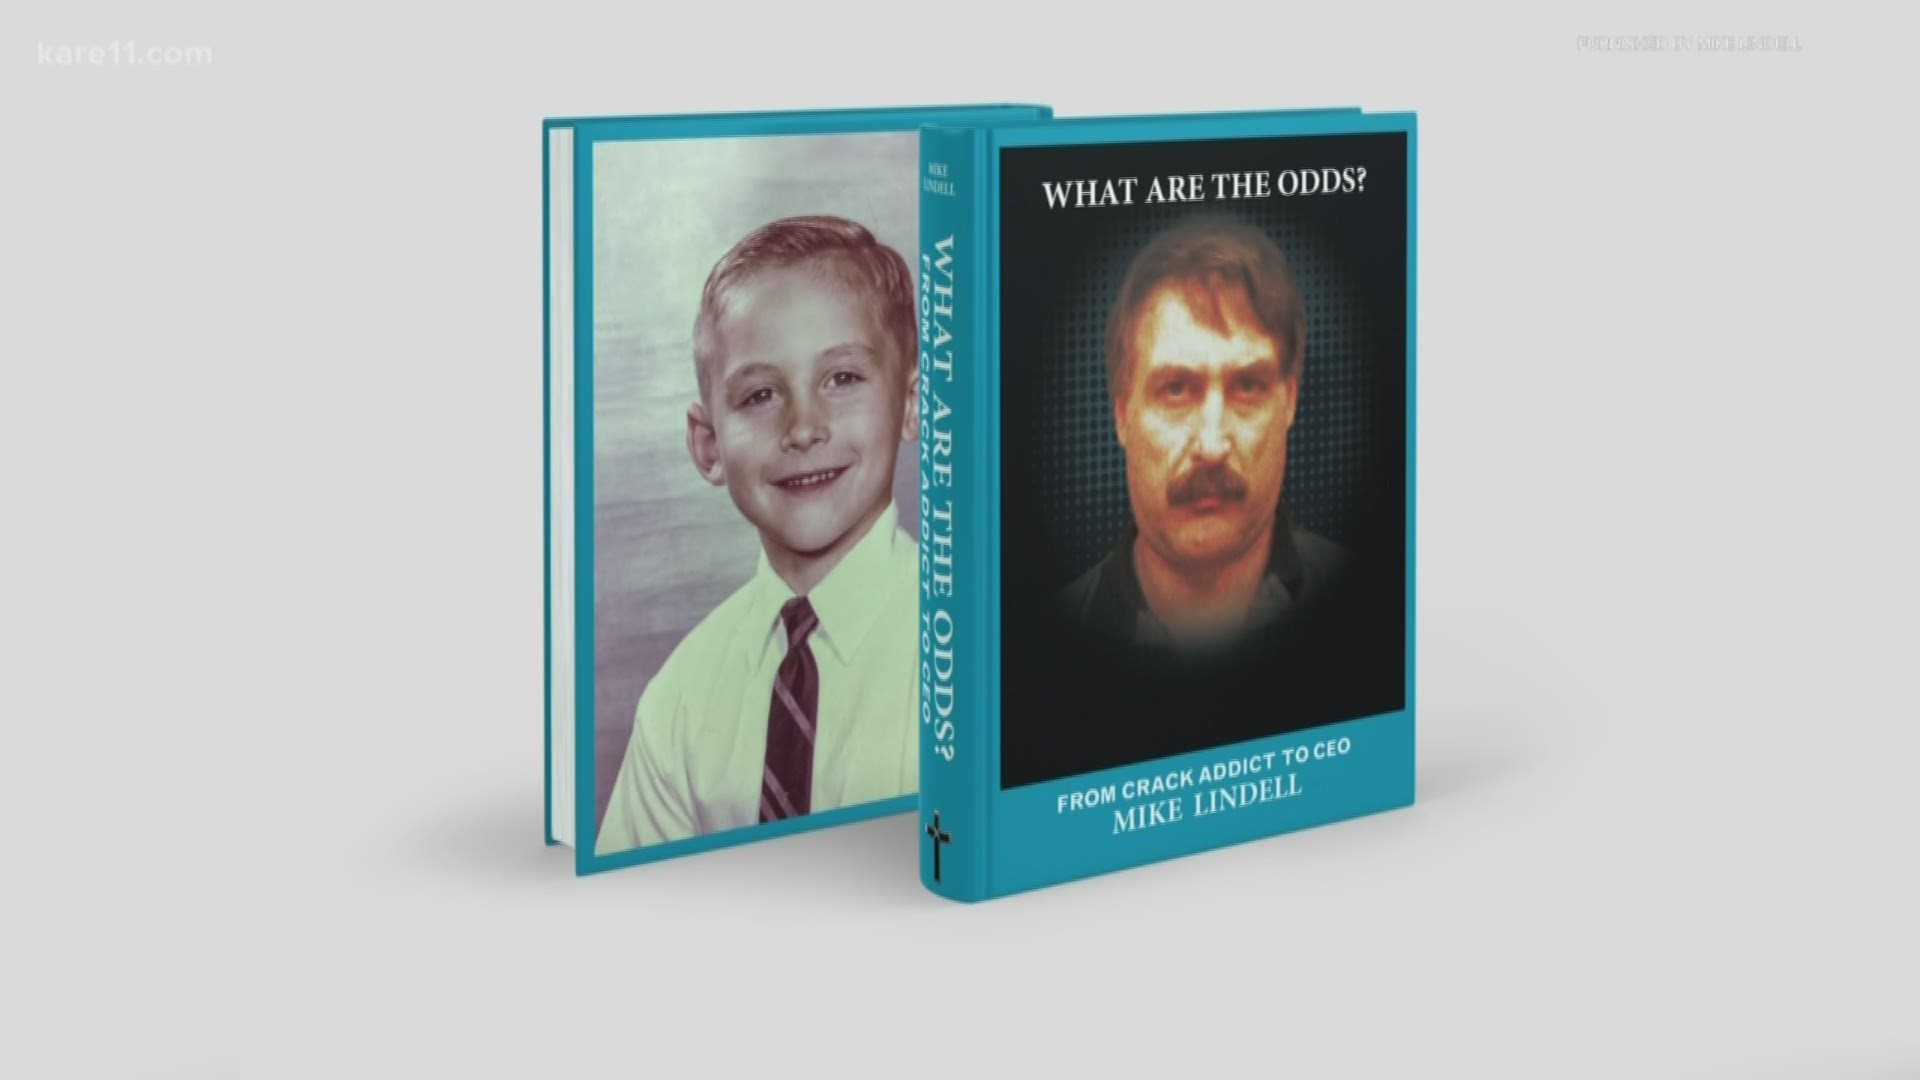 MyPillow Inventor Mike Lindell discusses his new memoir which chronicles his struggles and triumphs.